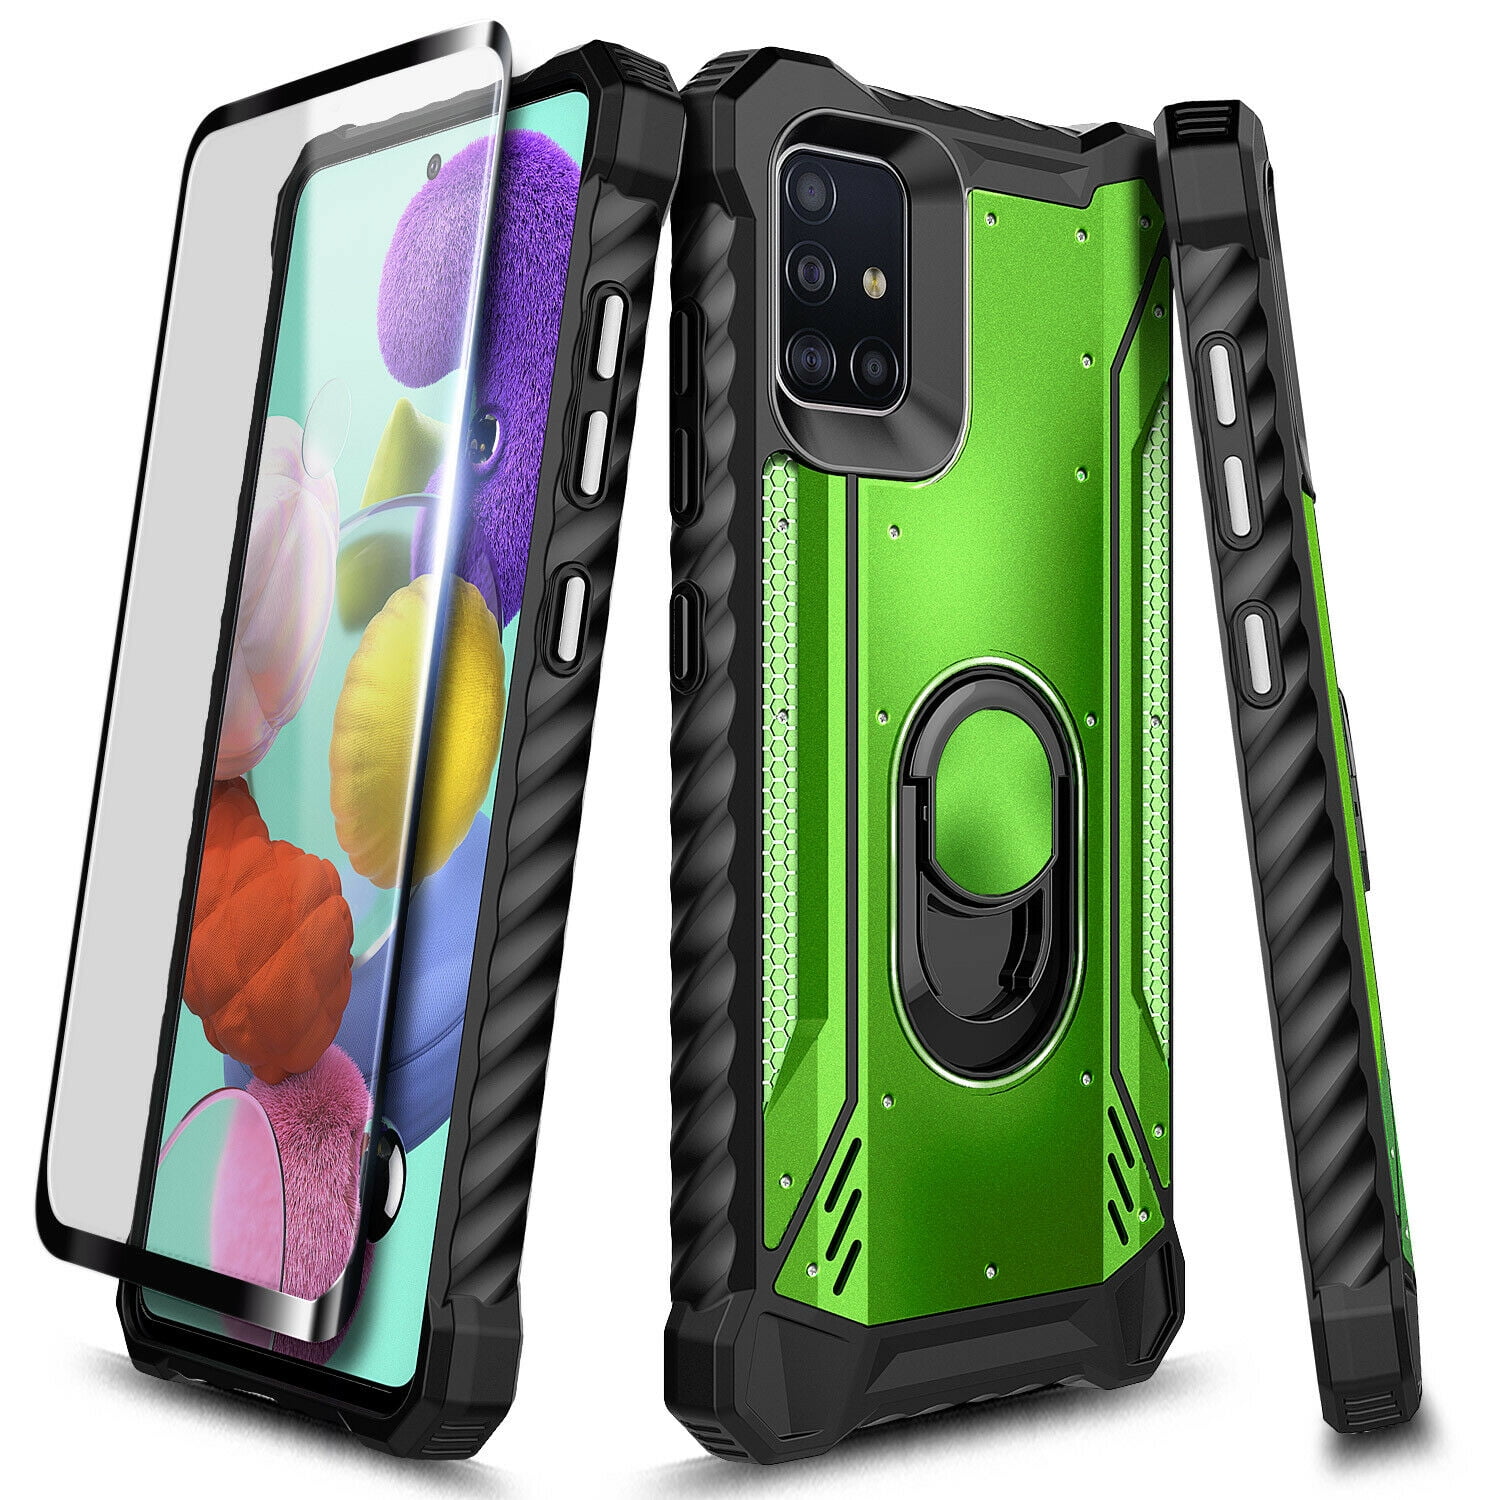 Nisso Case for Samsung Galaxy A71 Clear 360 Degree Outdoor Protective Rugged Transparent Cover with Integrated Screen Protector Mobile Phone Case for Samsung Galaxy A71 Teal Green